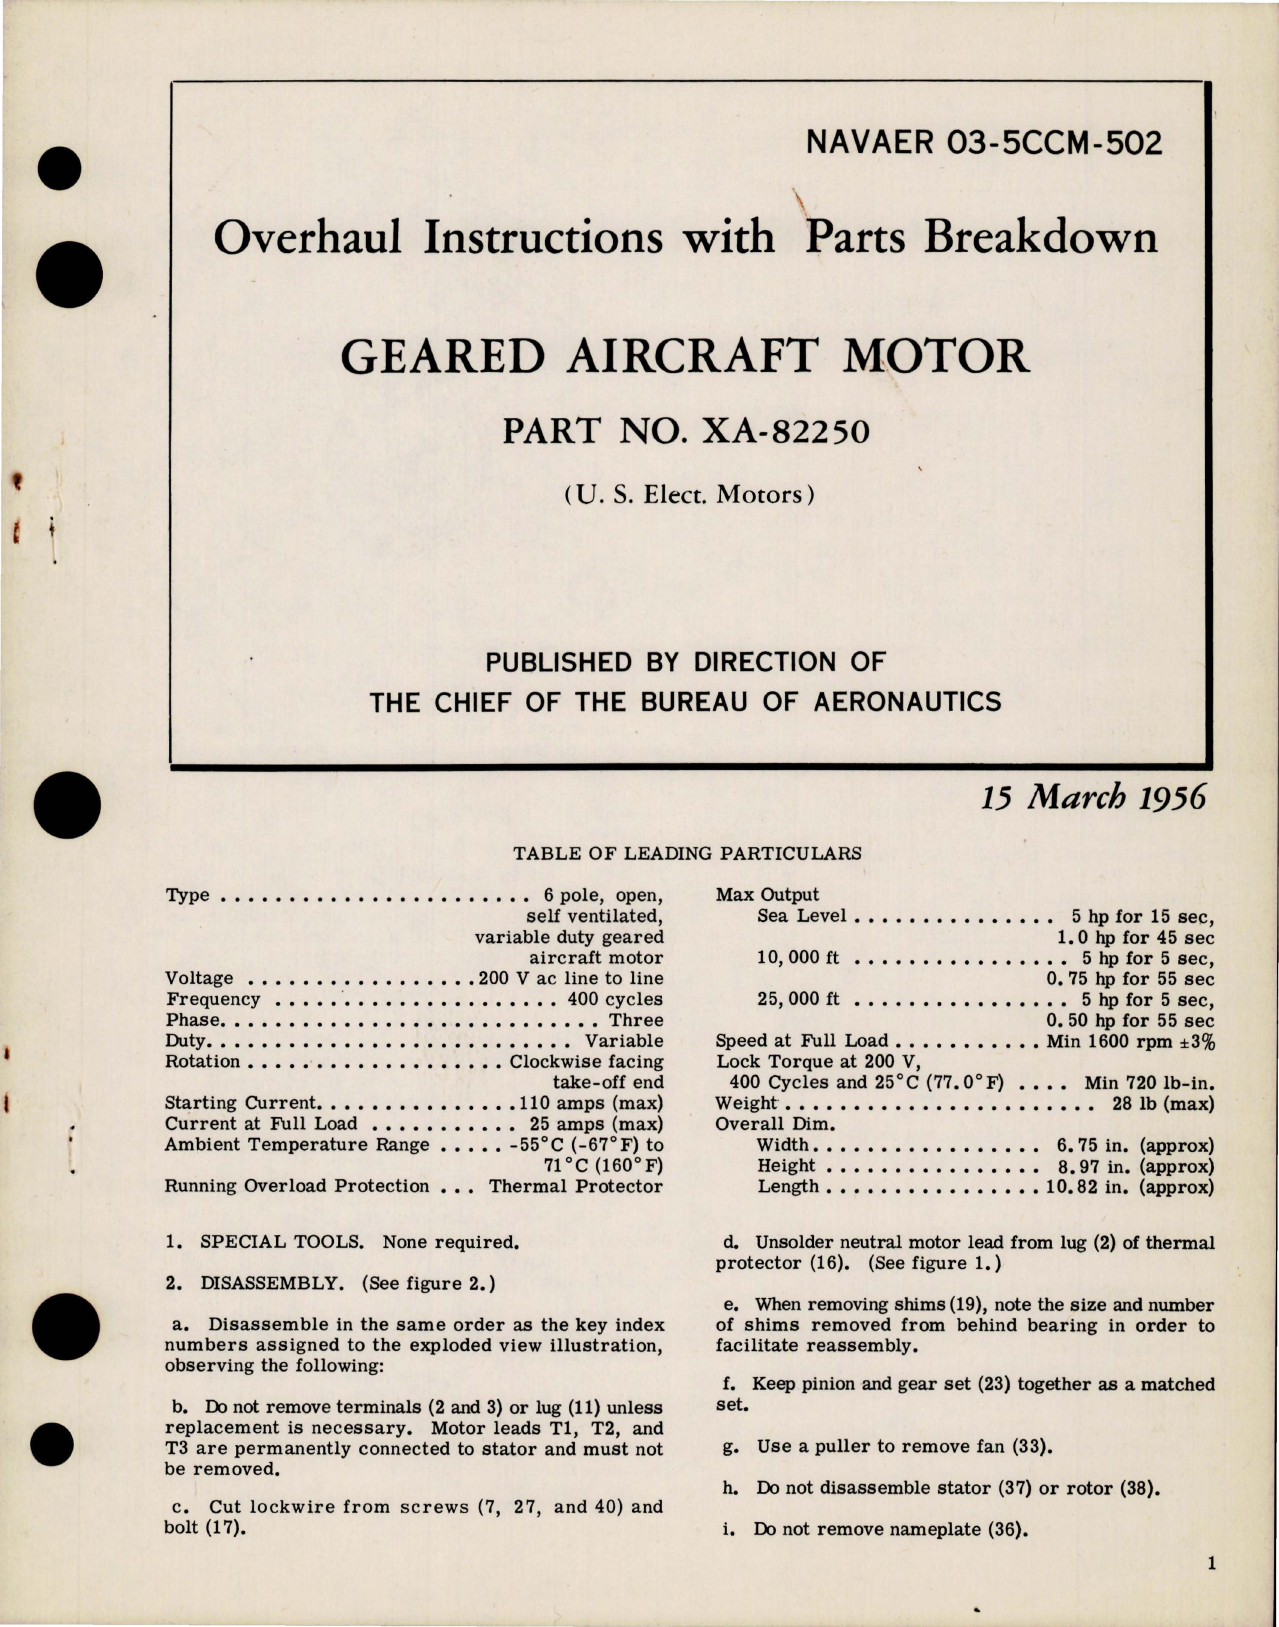 Sample page 1 from AirCorps Library document: Overhaul Instructions with Parts Breakdown for Geared Aircraft Motor - Part XA-82250 